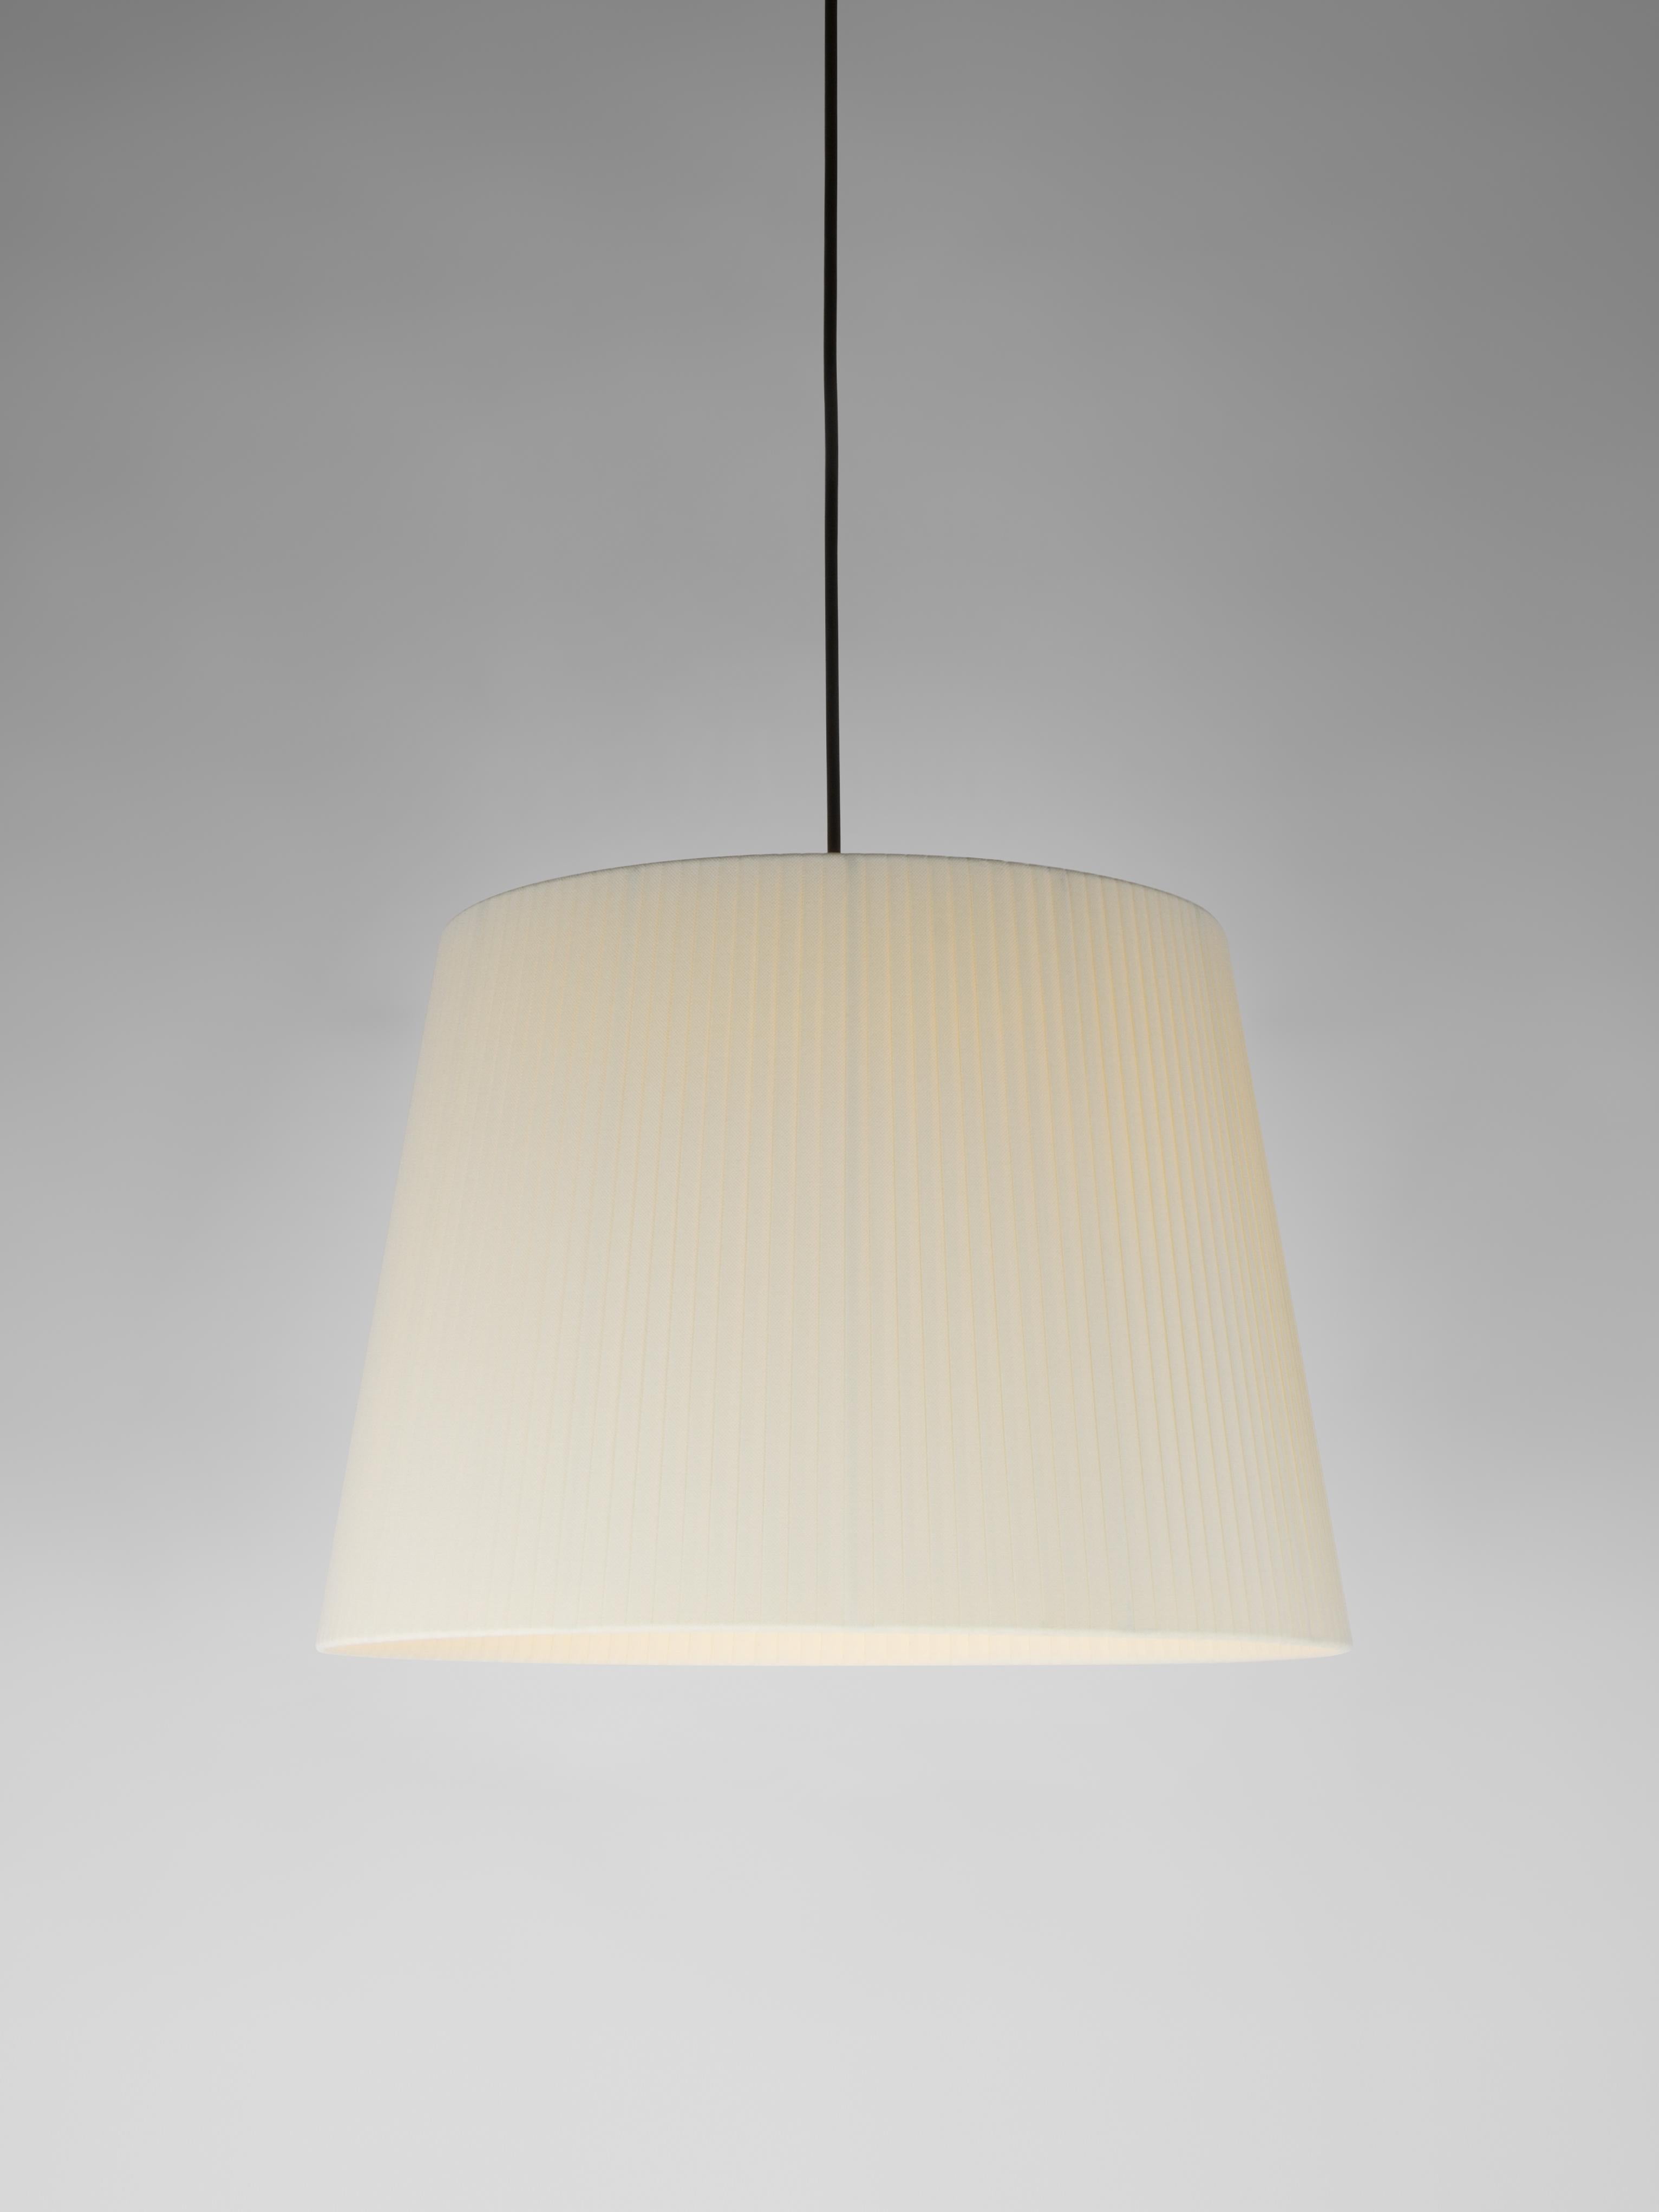 Natural Sísísí Cónicas GT1 pendant lamp by Santa & Cole
Dimensions: D 45 x H 32 cm
Materials: Metal, ribbon.
Available in other colors.
Also available in two lights version.

The conical shape group has multiple finishes and sizes. It consists